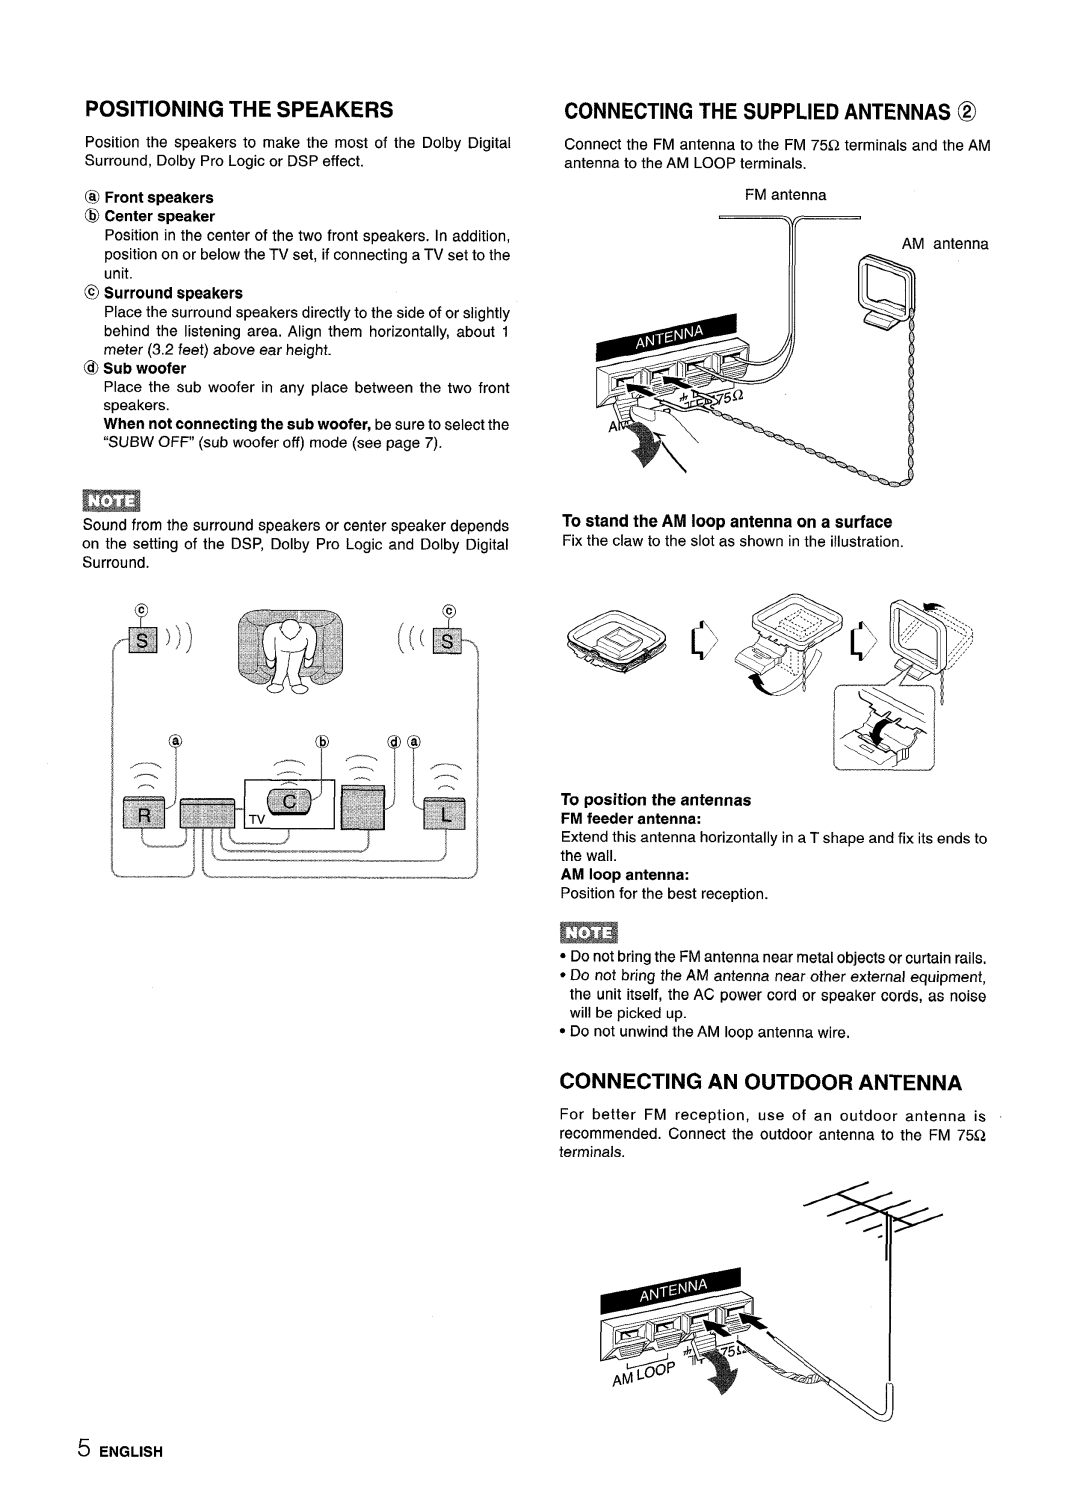 Sony AV-DV75 manual ‘-’d, ‘-’%, Positioning The Speakers, Connecting The Supplied Antennas @, Connecting An Outdoor Antenna 